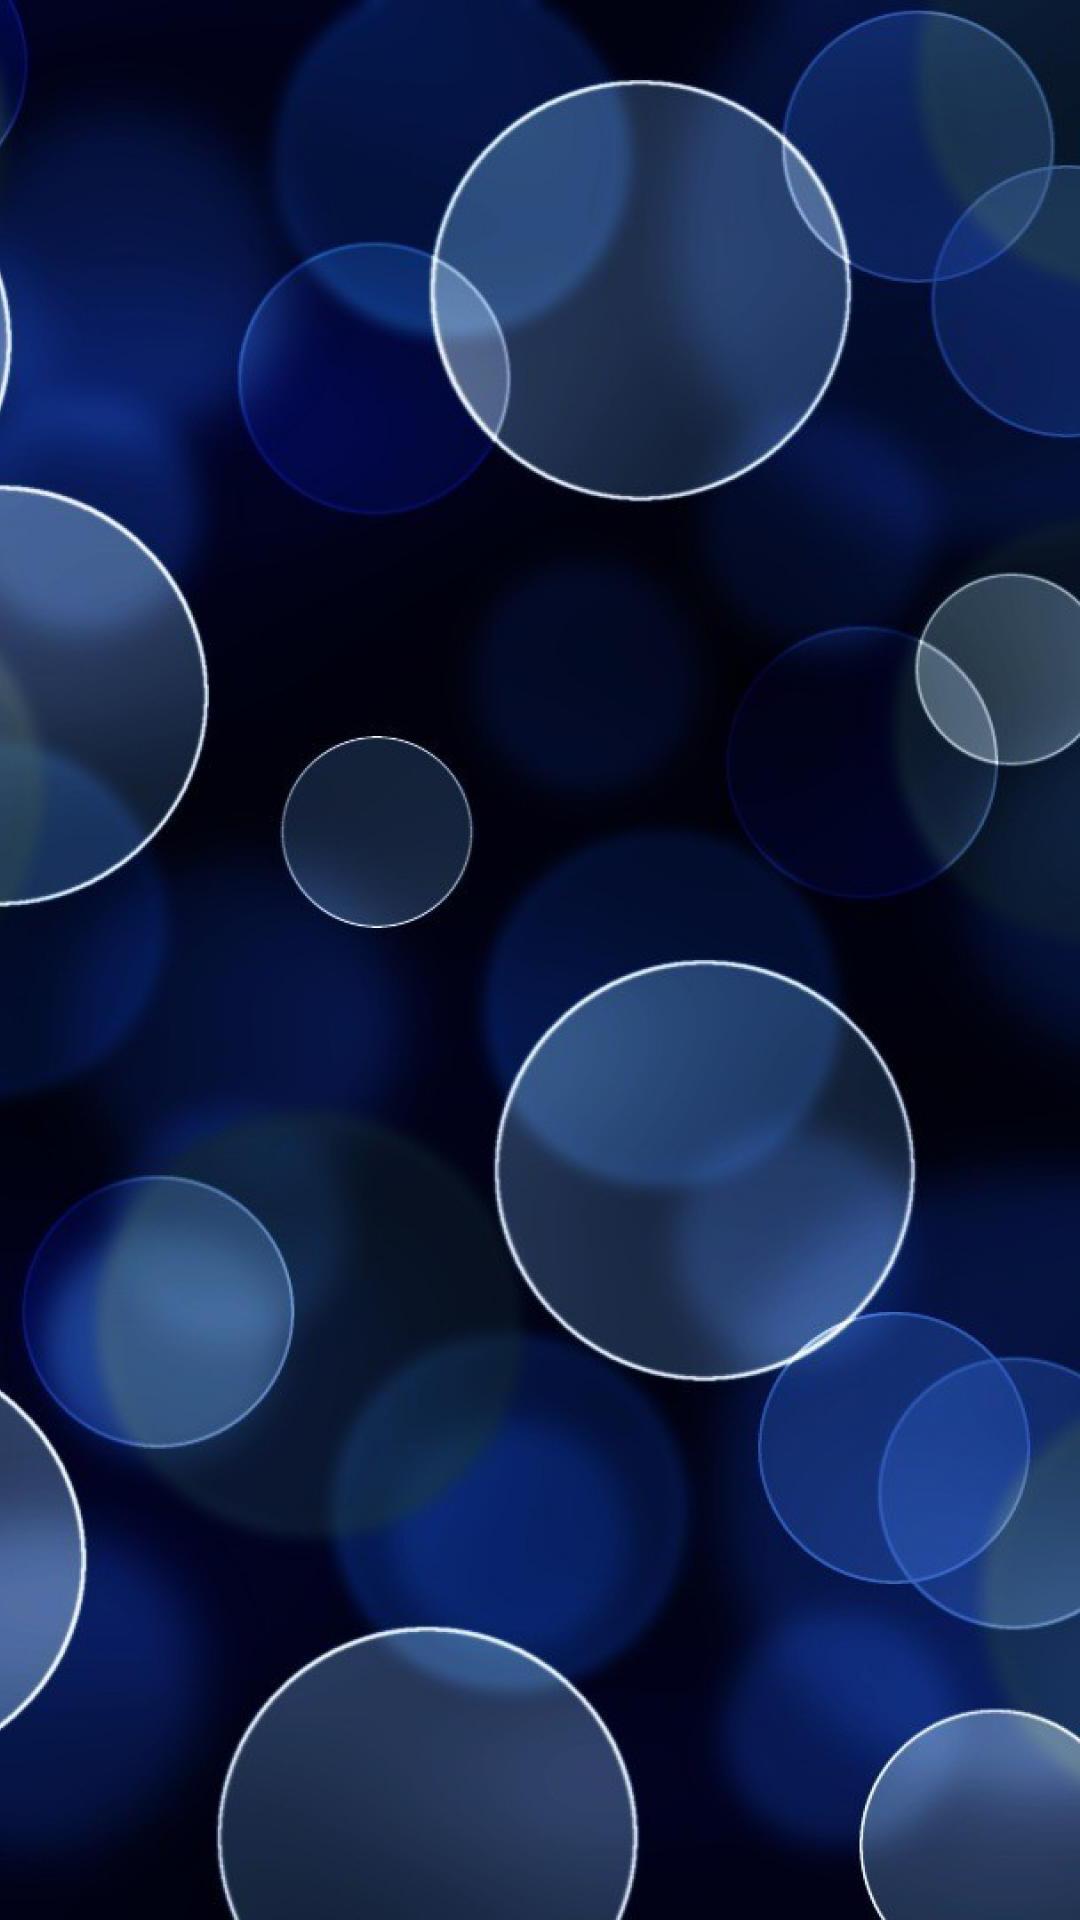 Black And Blue 4k Android Wallpapers - Wallpaper Cave